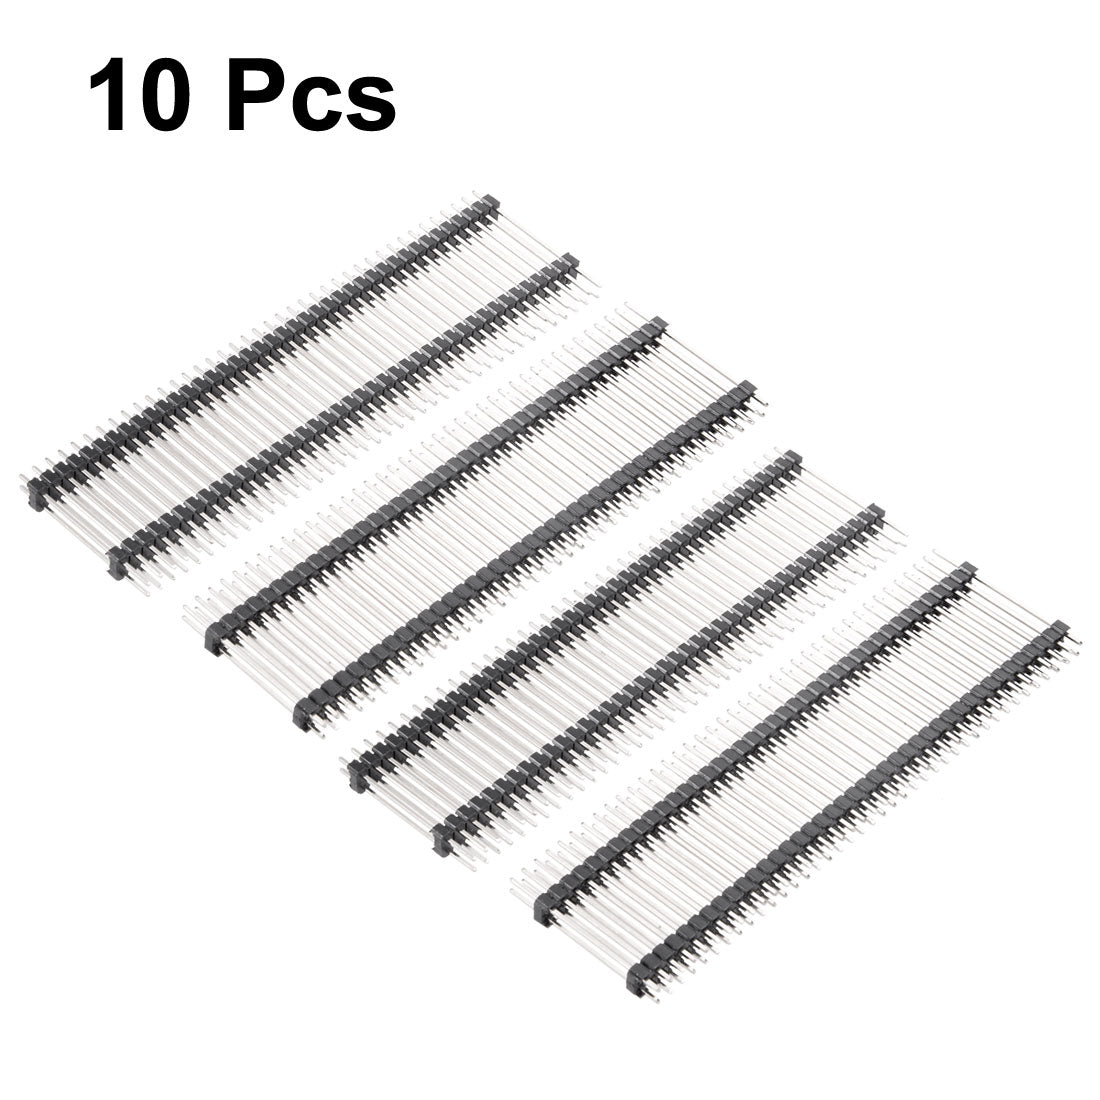 uxcell Uxcell 10Pcs 2.54mm Pitch 40Pin 30mm Length Double Row Straight Connector Pin Header Strip for Arduino Prototype Shield